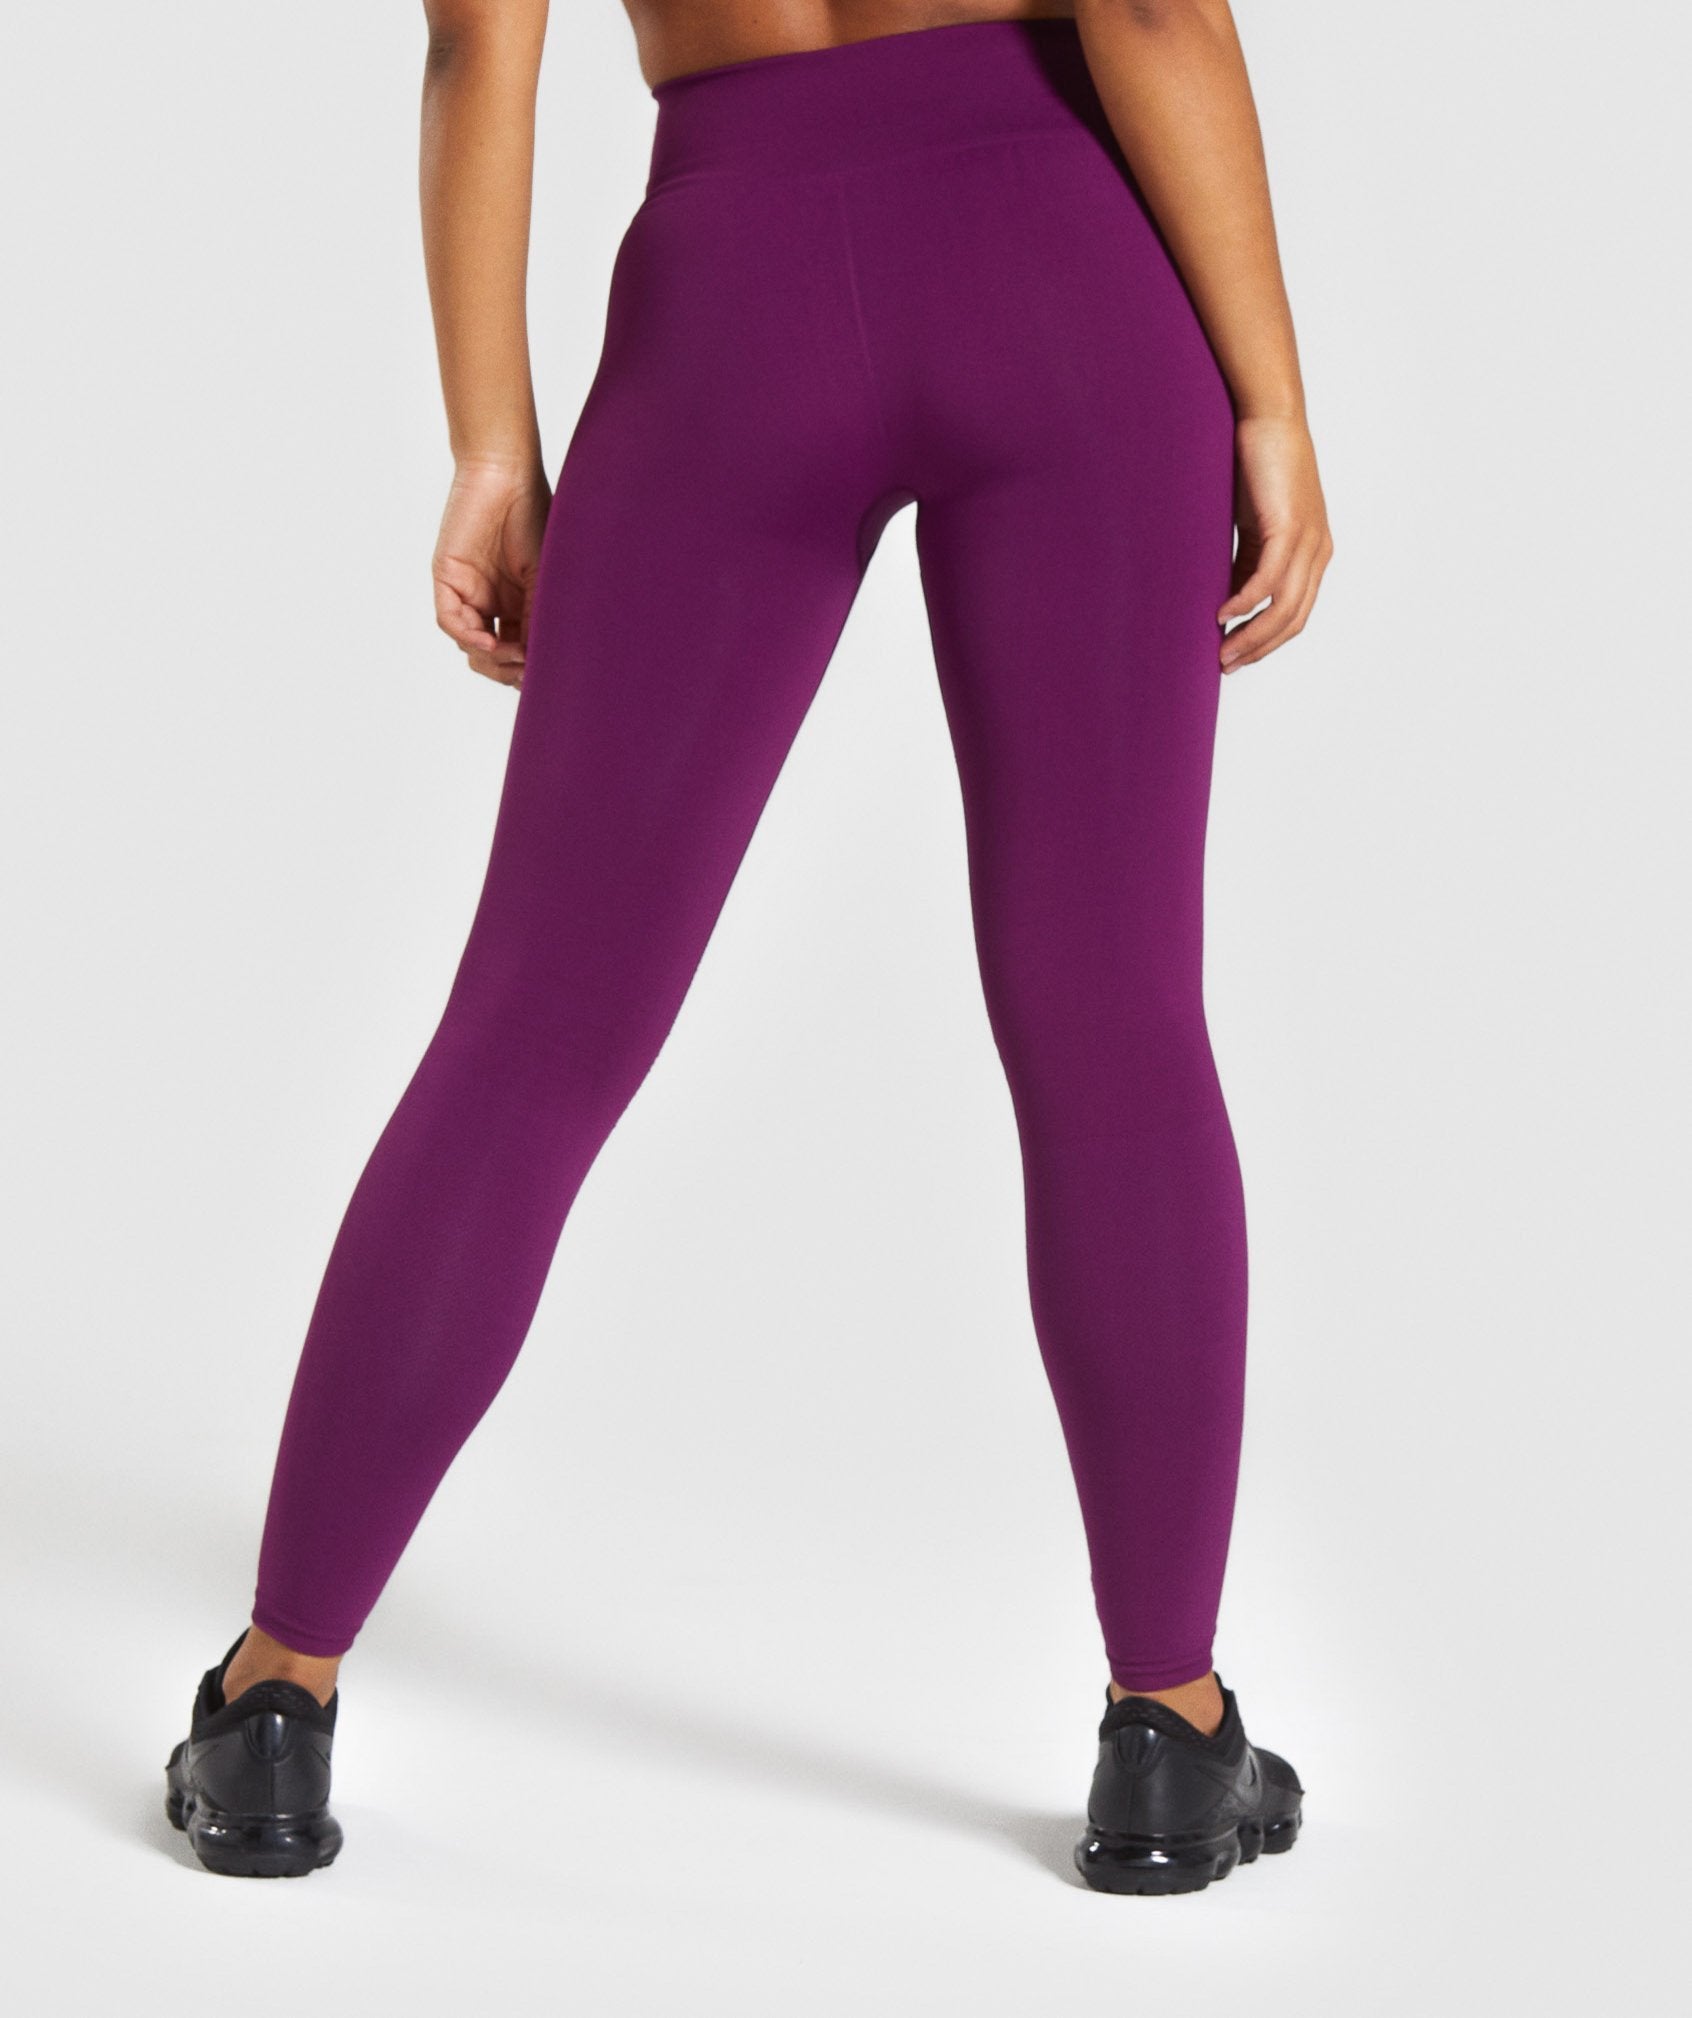 Breeze Lightweight Seamless Tights in Purple - view 2